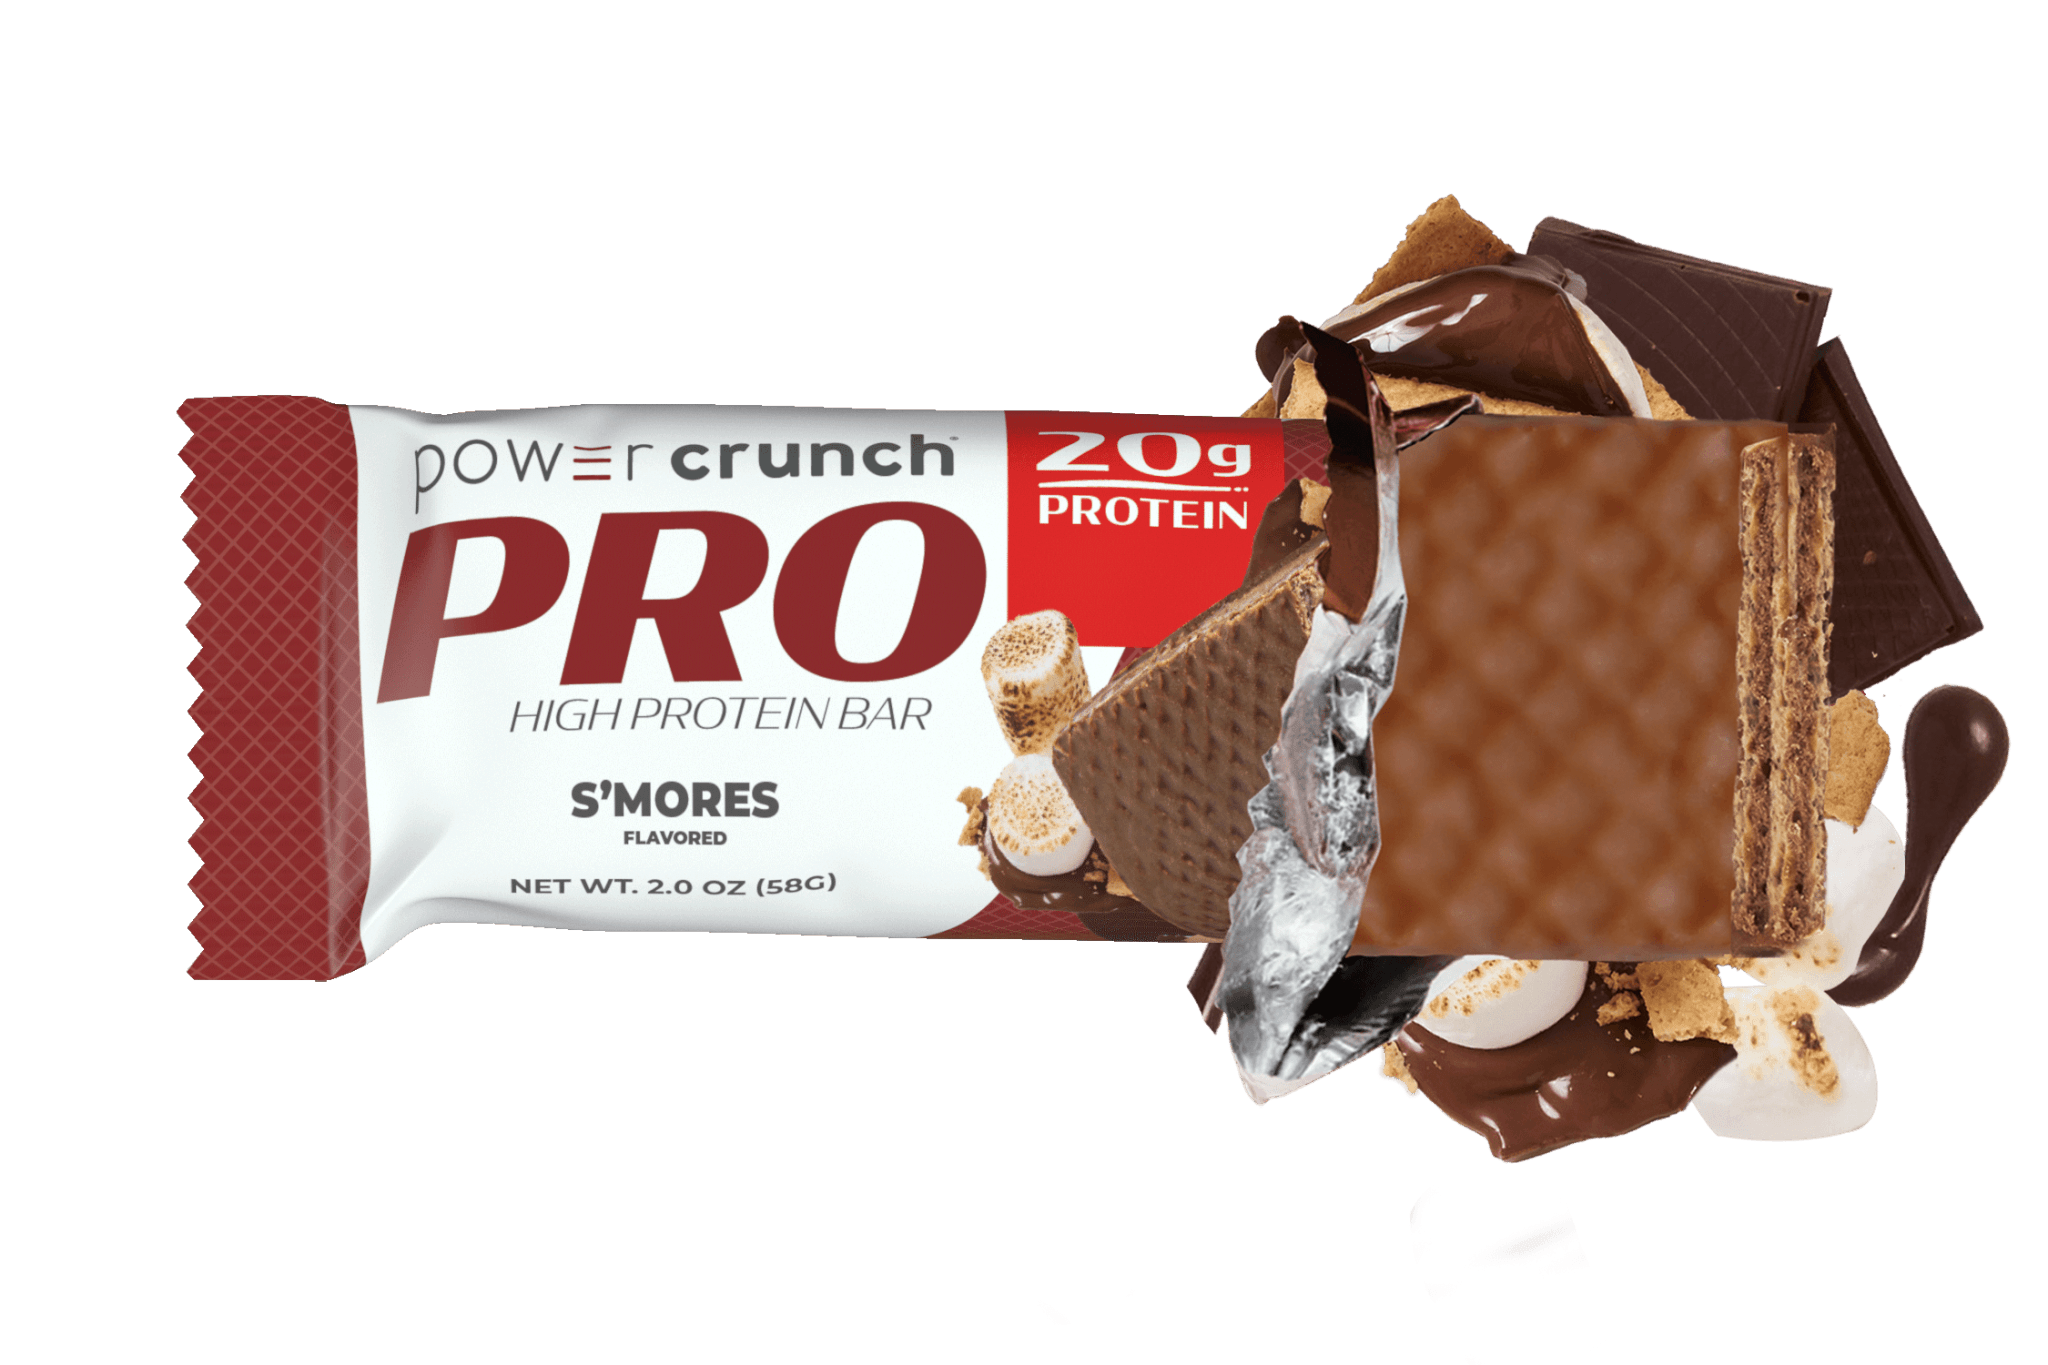 Power Crunch PRO S'mores 20g protein bars pictured with S'mores flavor explosion